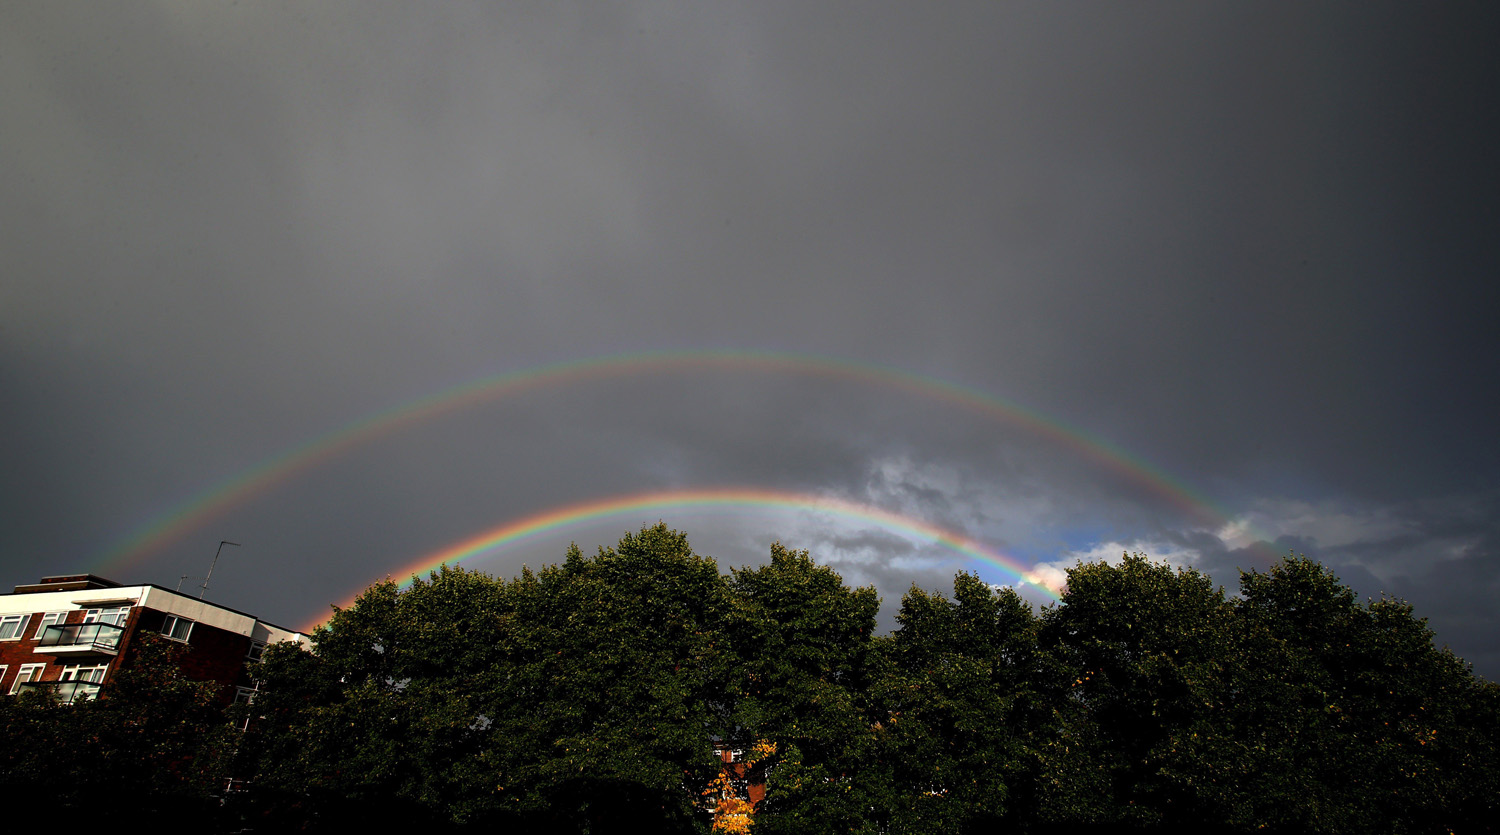 Double rainbows are seen after a heavy rain in London, UK on August 11, 2014.